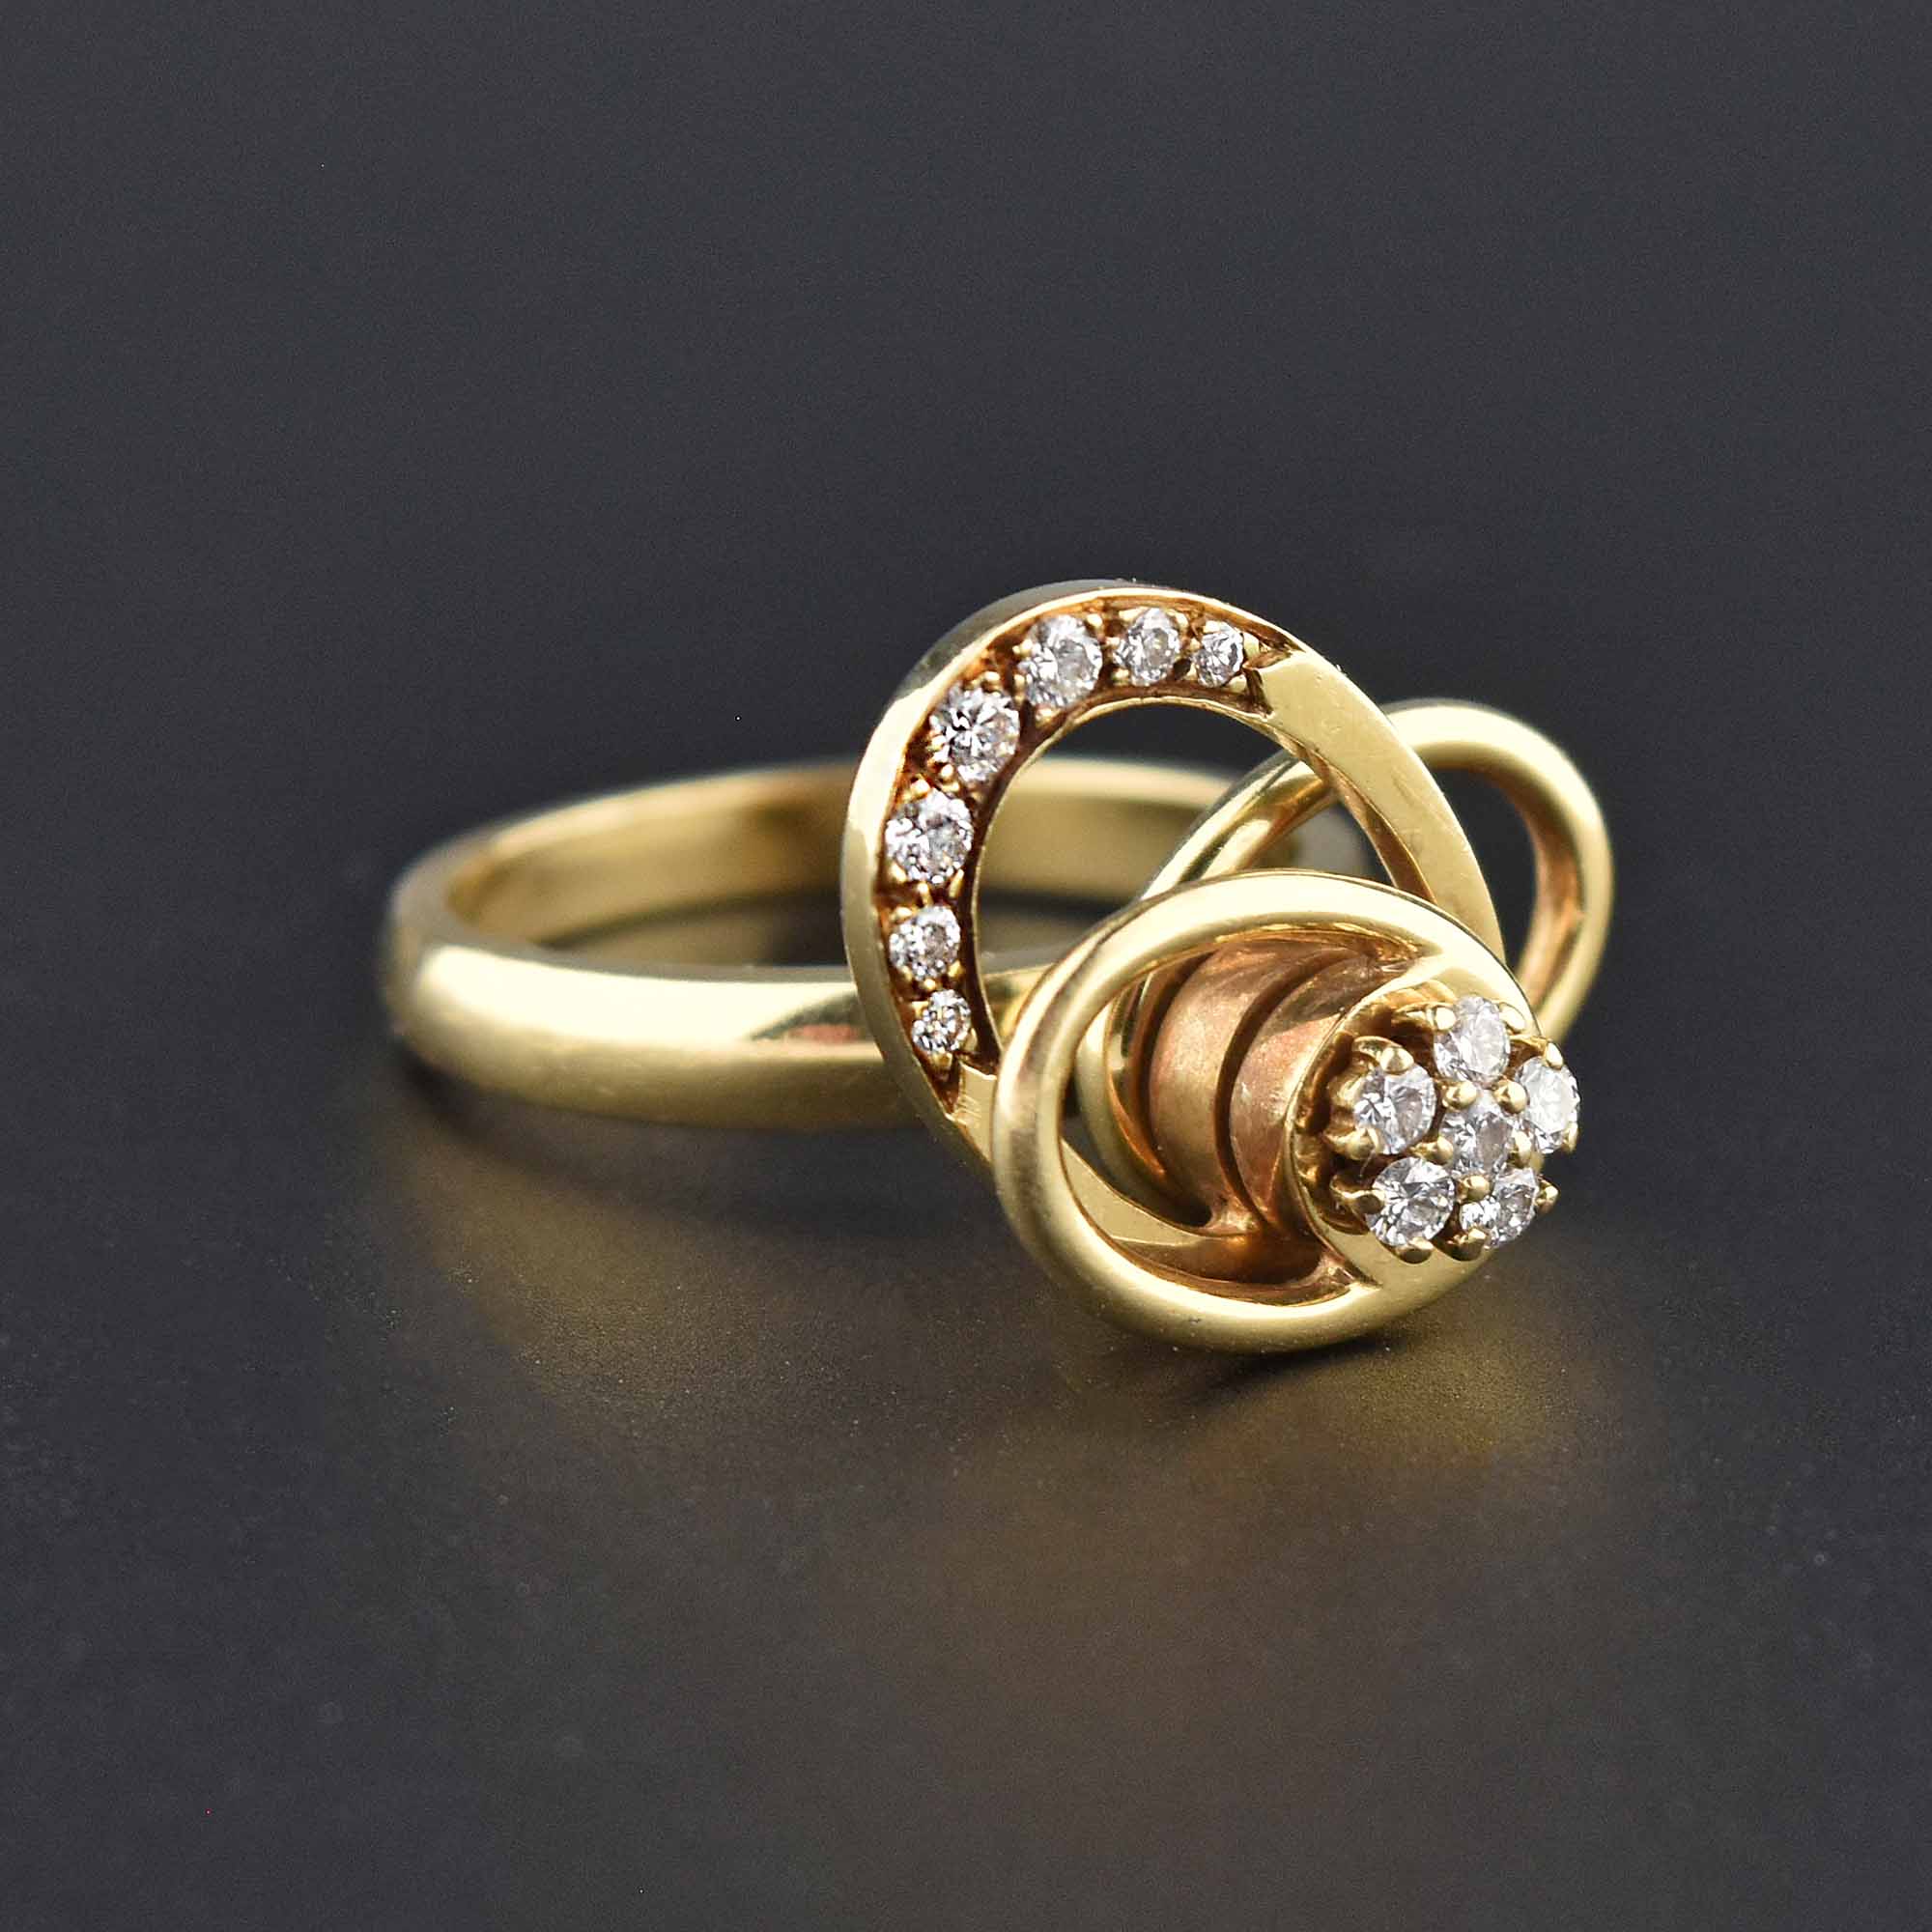 Buying Vintage Jewelry: How Much Should I Really Spend?